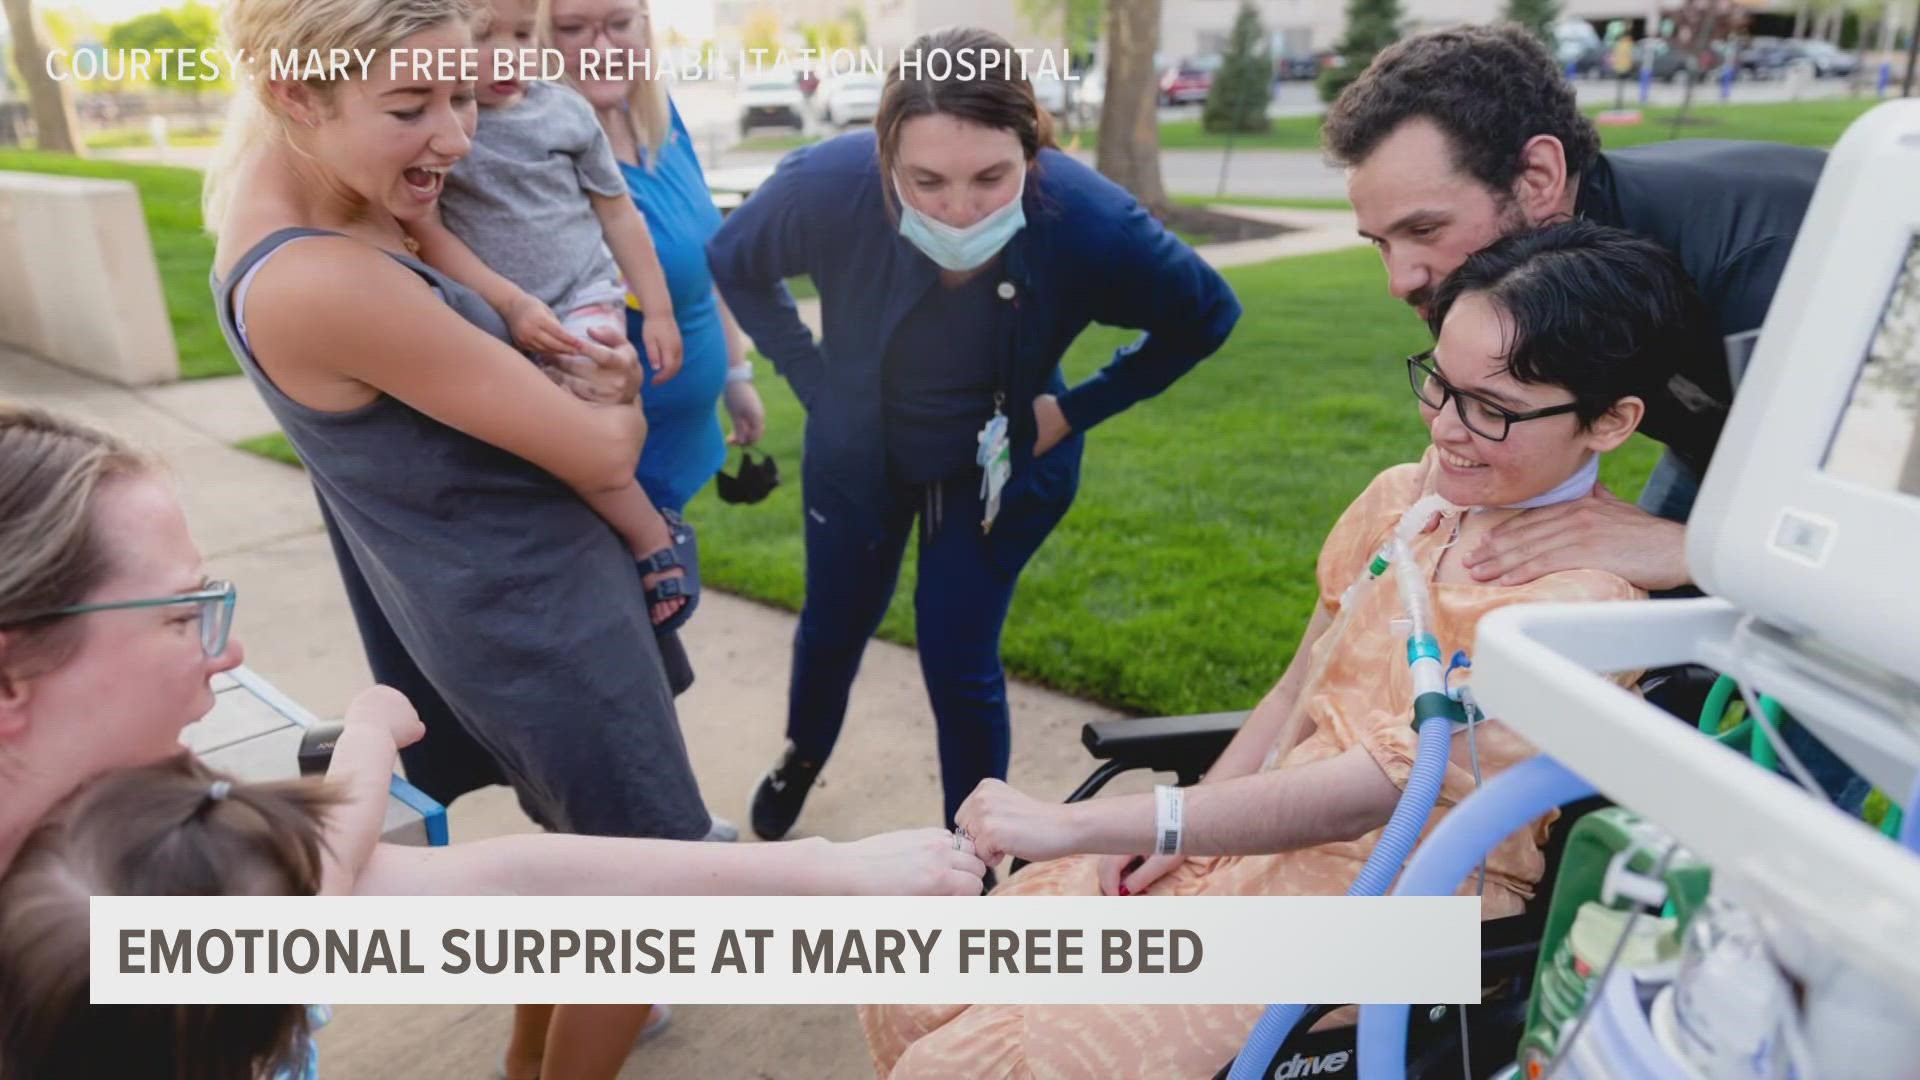 Kaitlyn Sterling said yes when her boyfriend Stan popped the question at Mary Free Bed Rehabilitation Hospital.